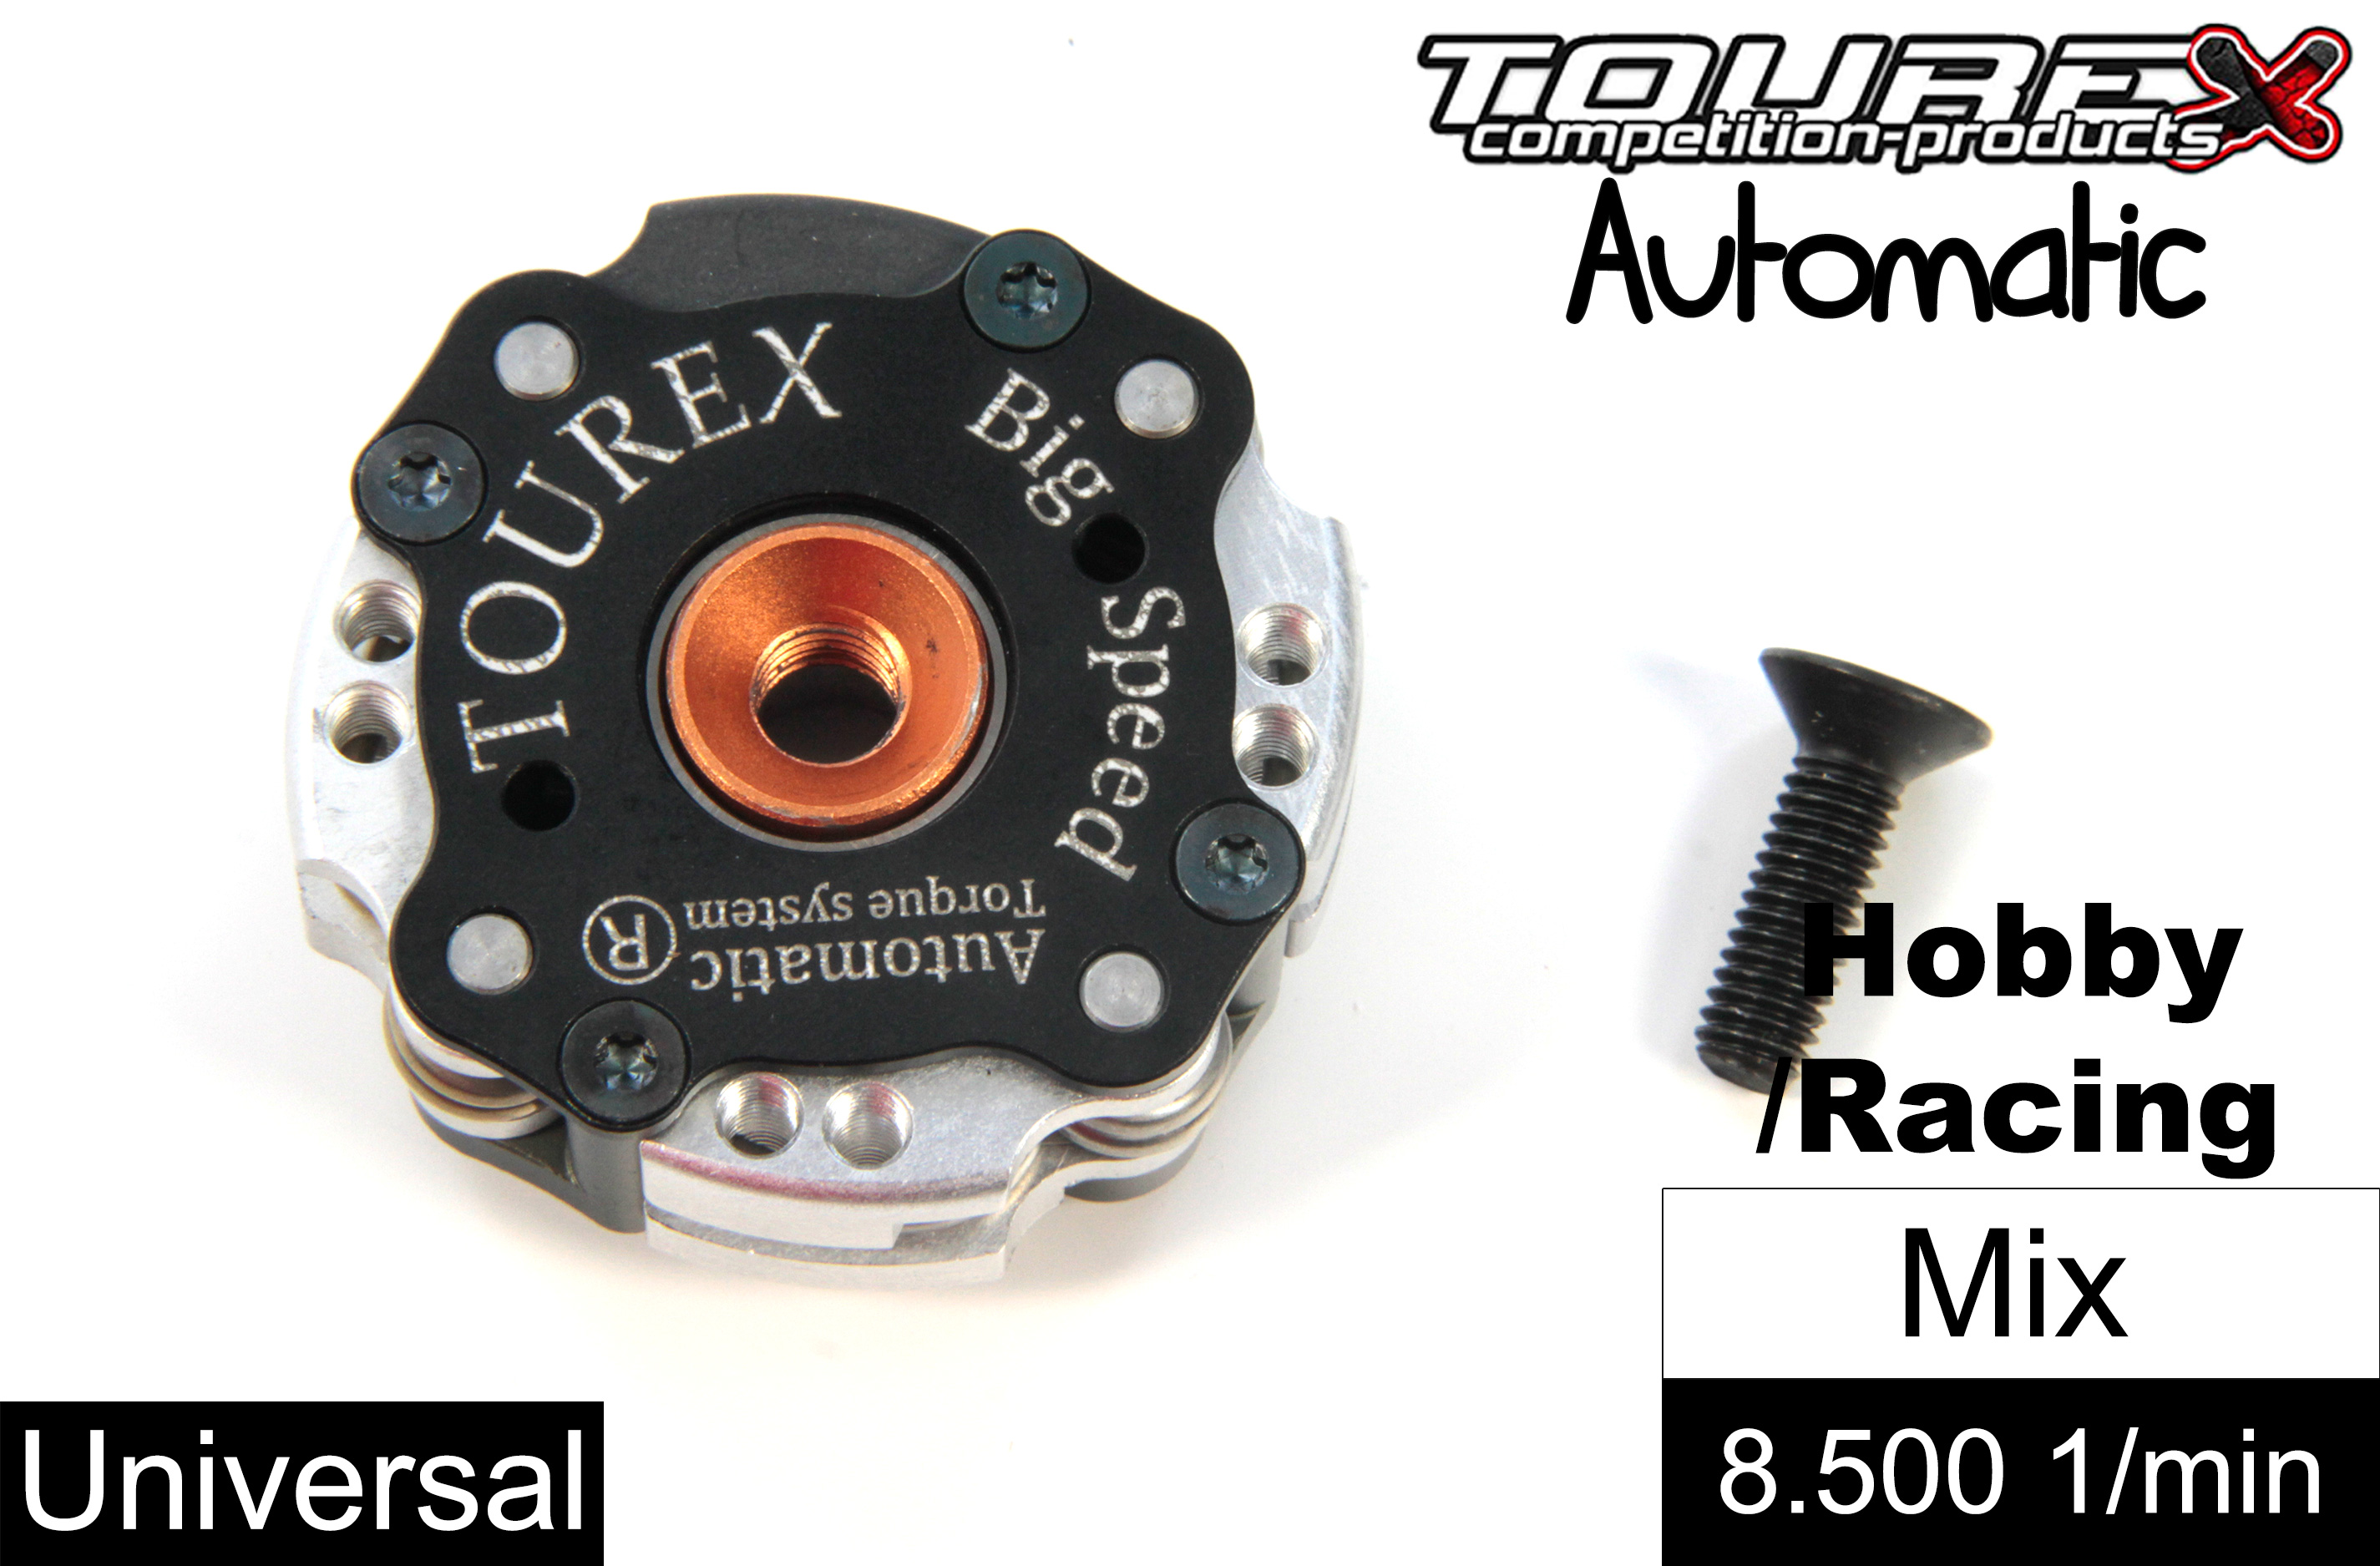 TXLA-910-L-MIX Tourex Big-Speed Automatic for FG/HPI/Losi/Smartech and many more